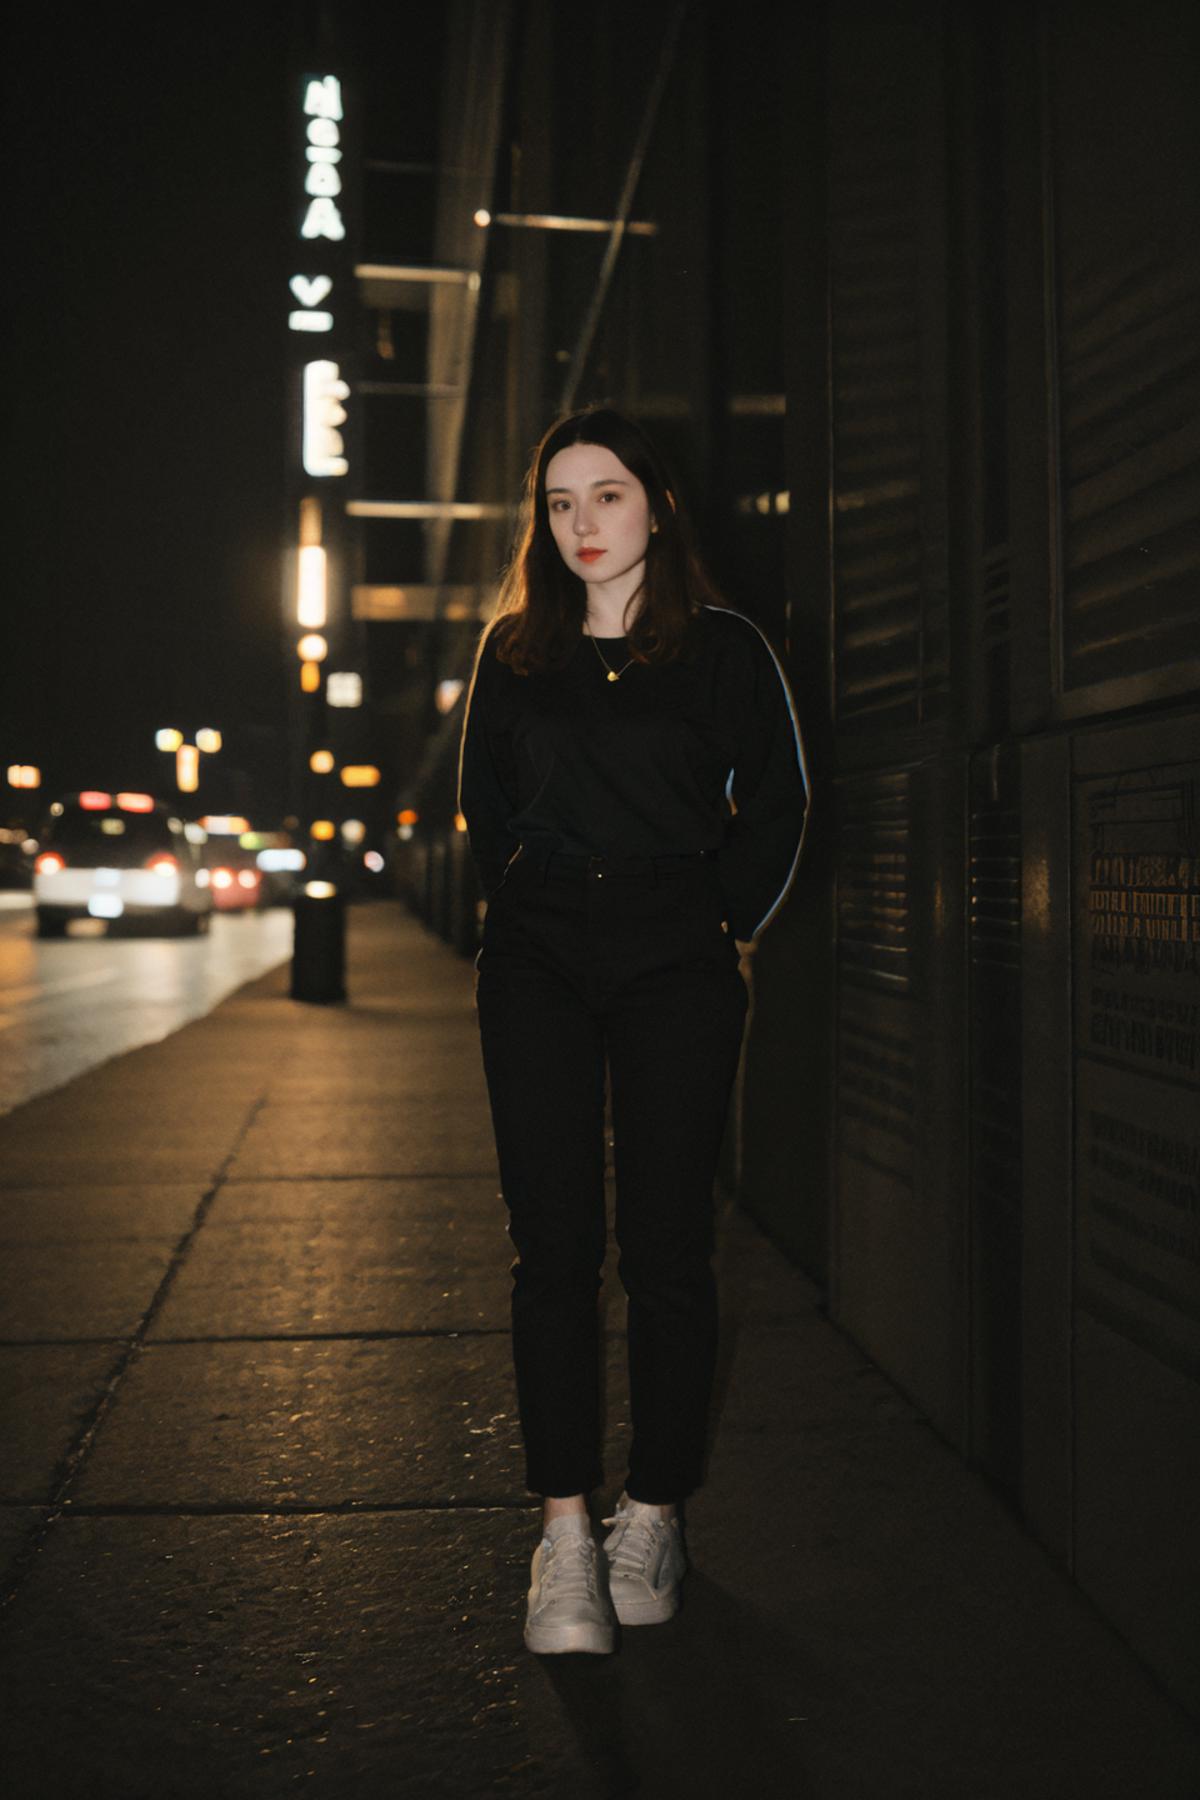 A woman standing on a sidewalk at night.